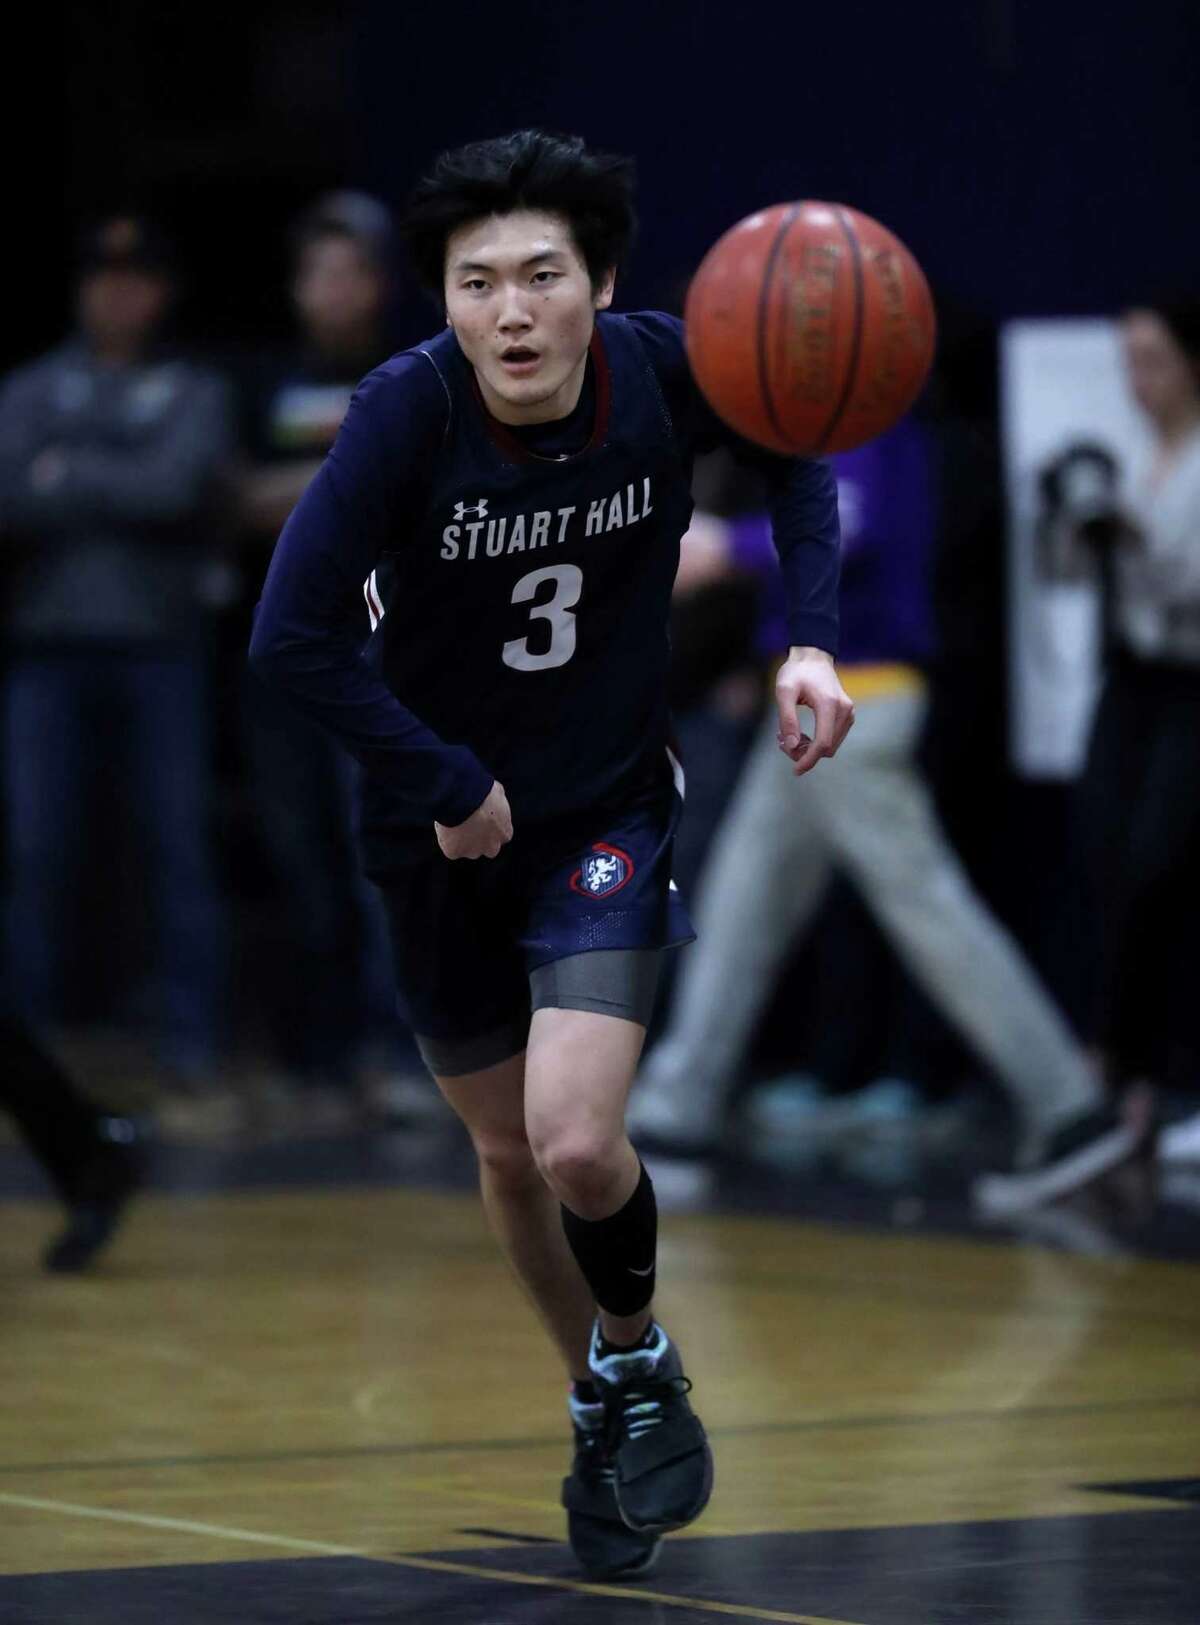 Brandon Lum scored 21 points for Stuart Hall in its 44-37 NorCal Division V title-game defeat of Woodside Priory.